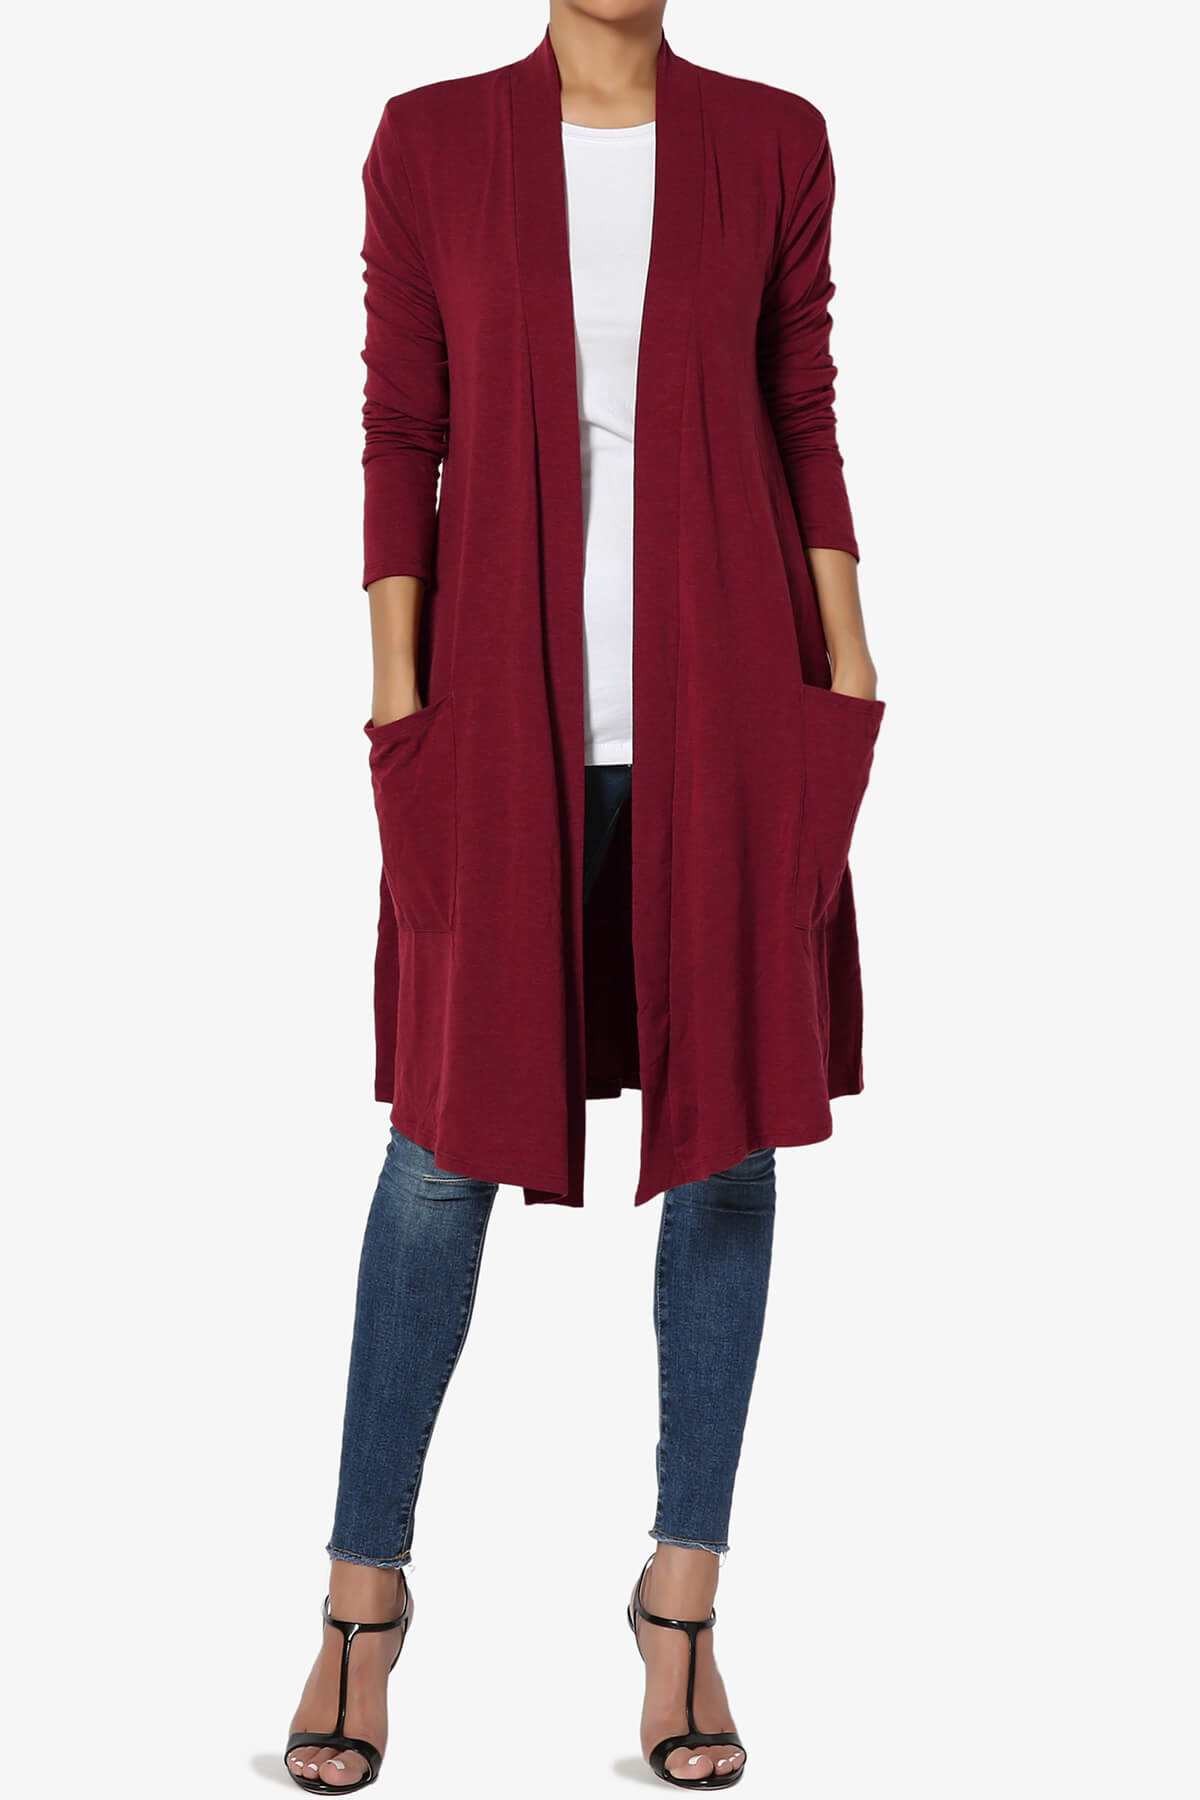 Load image into Gallery viewer, Daday Pocket Jersey Knee Length Cardigan BURGUNDY_6
